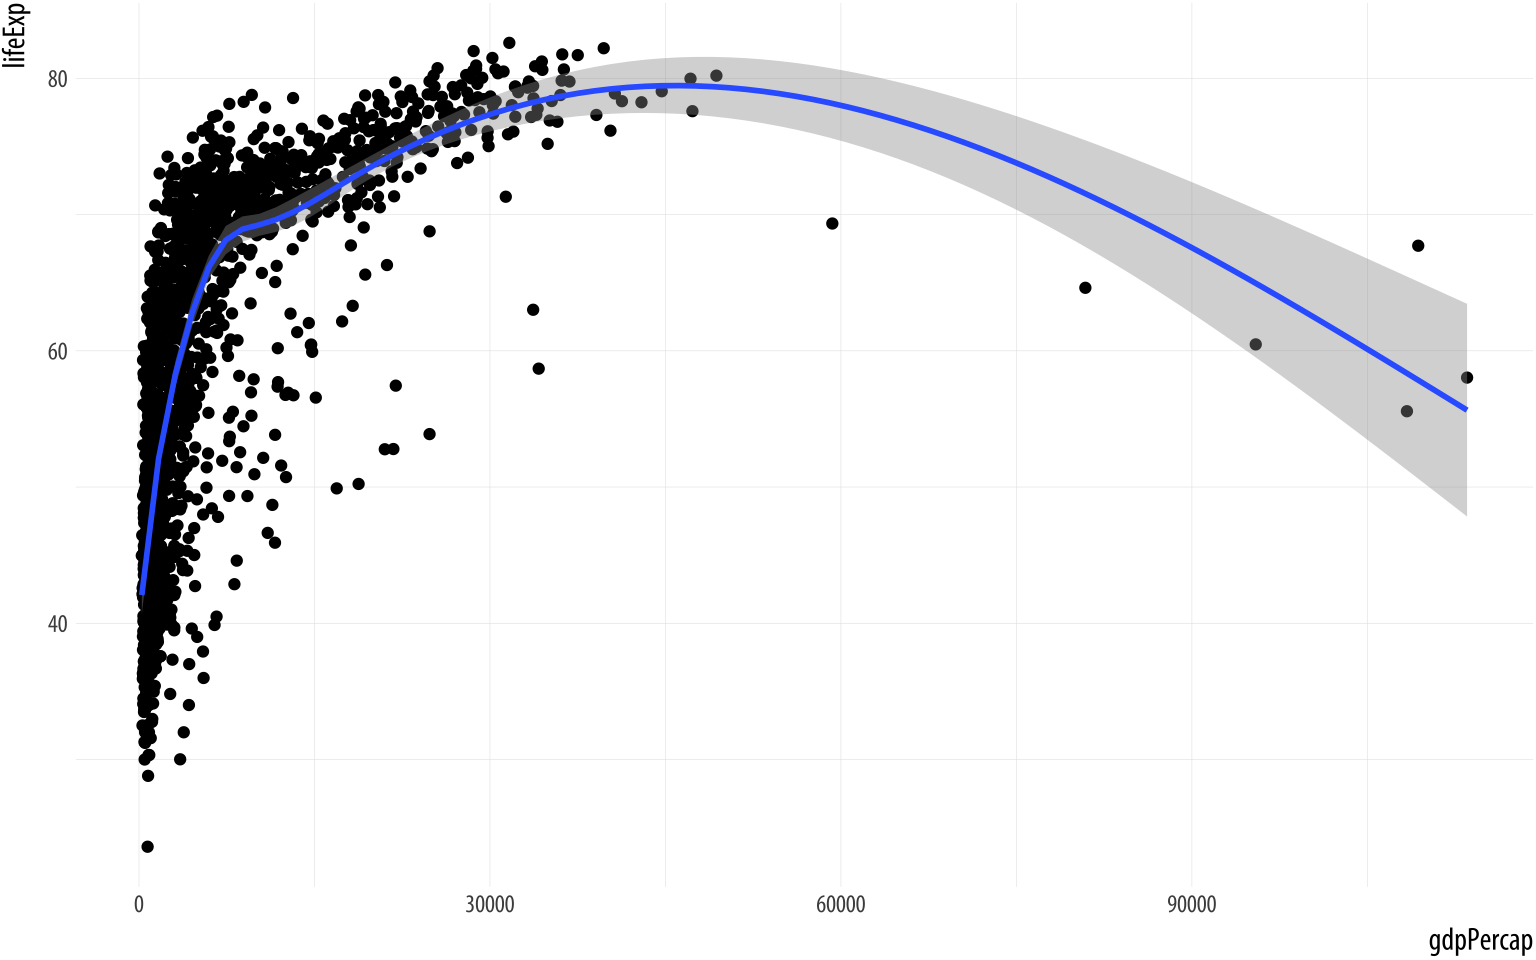 Life Expectancy vs GDP, showing both points and a GAM smoother.